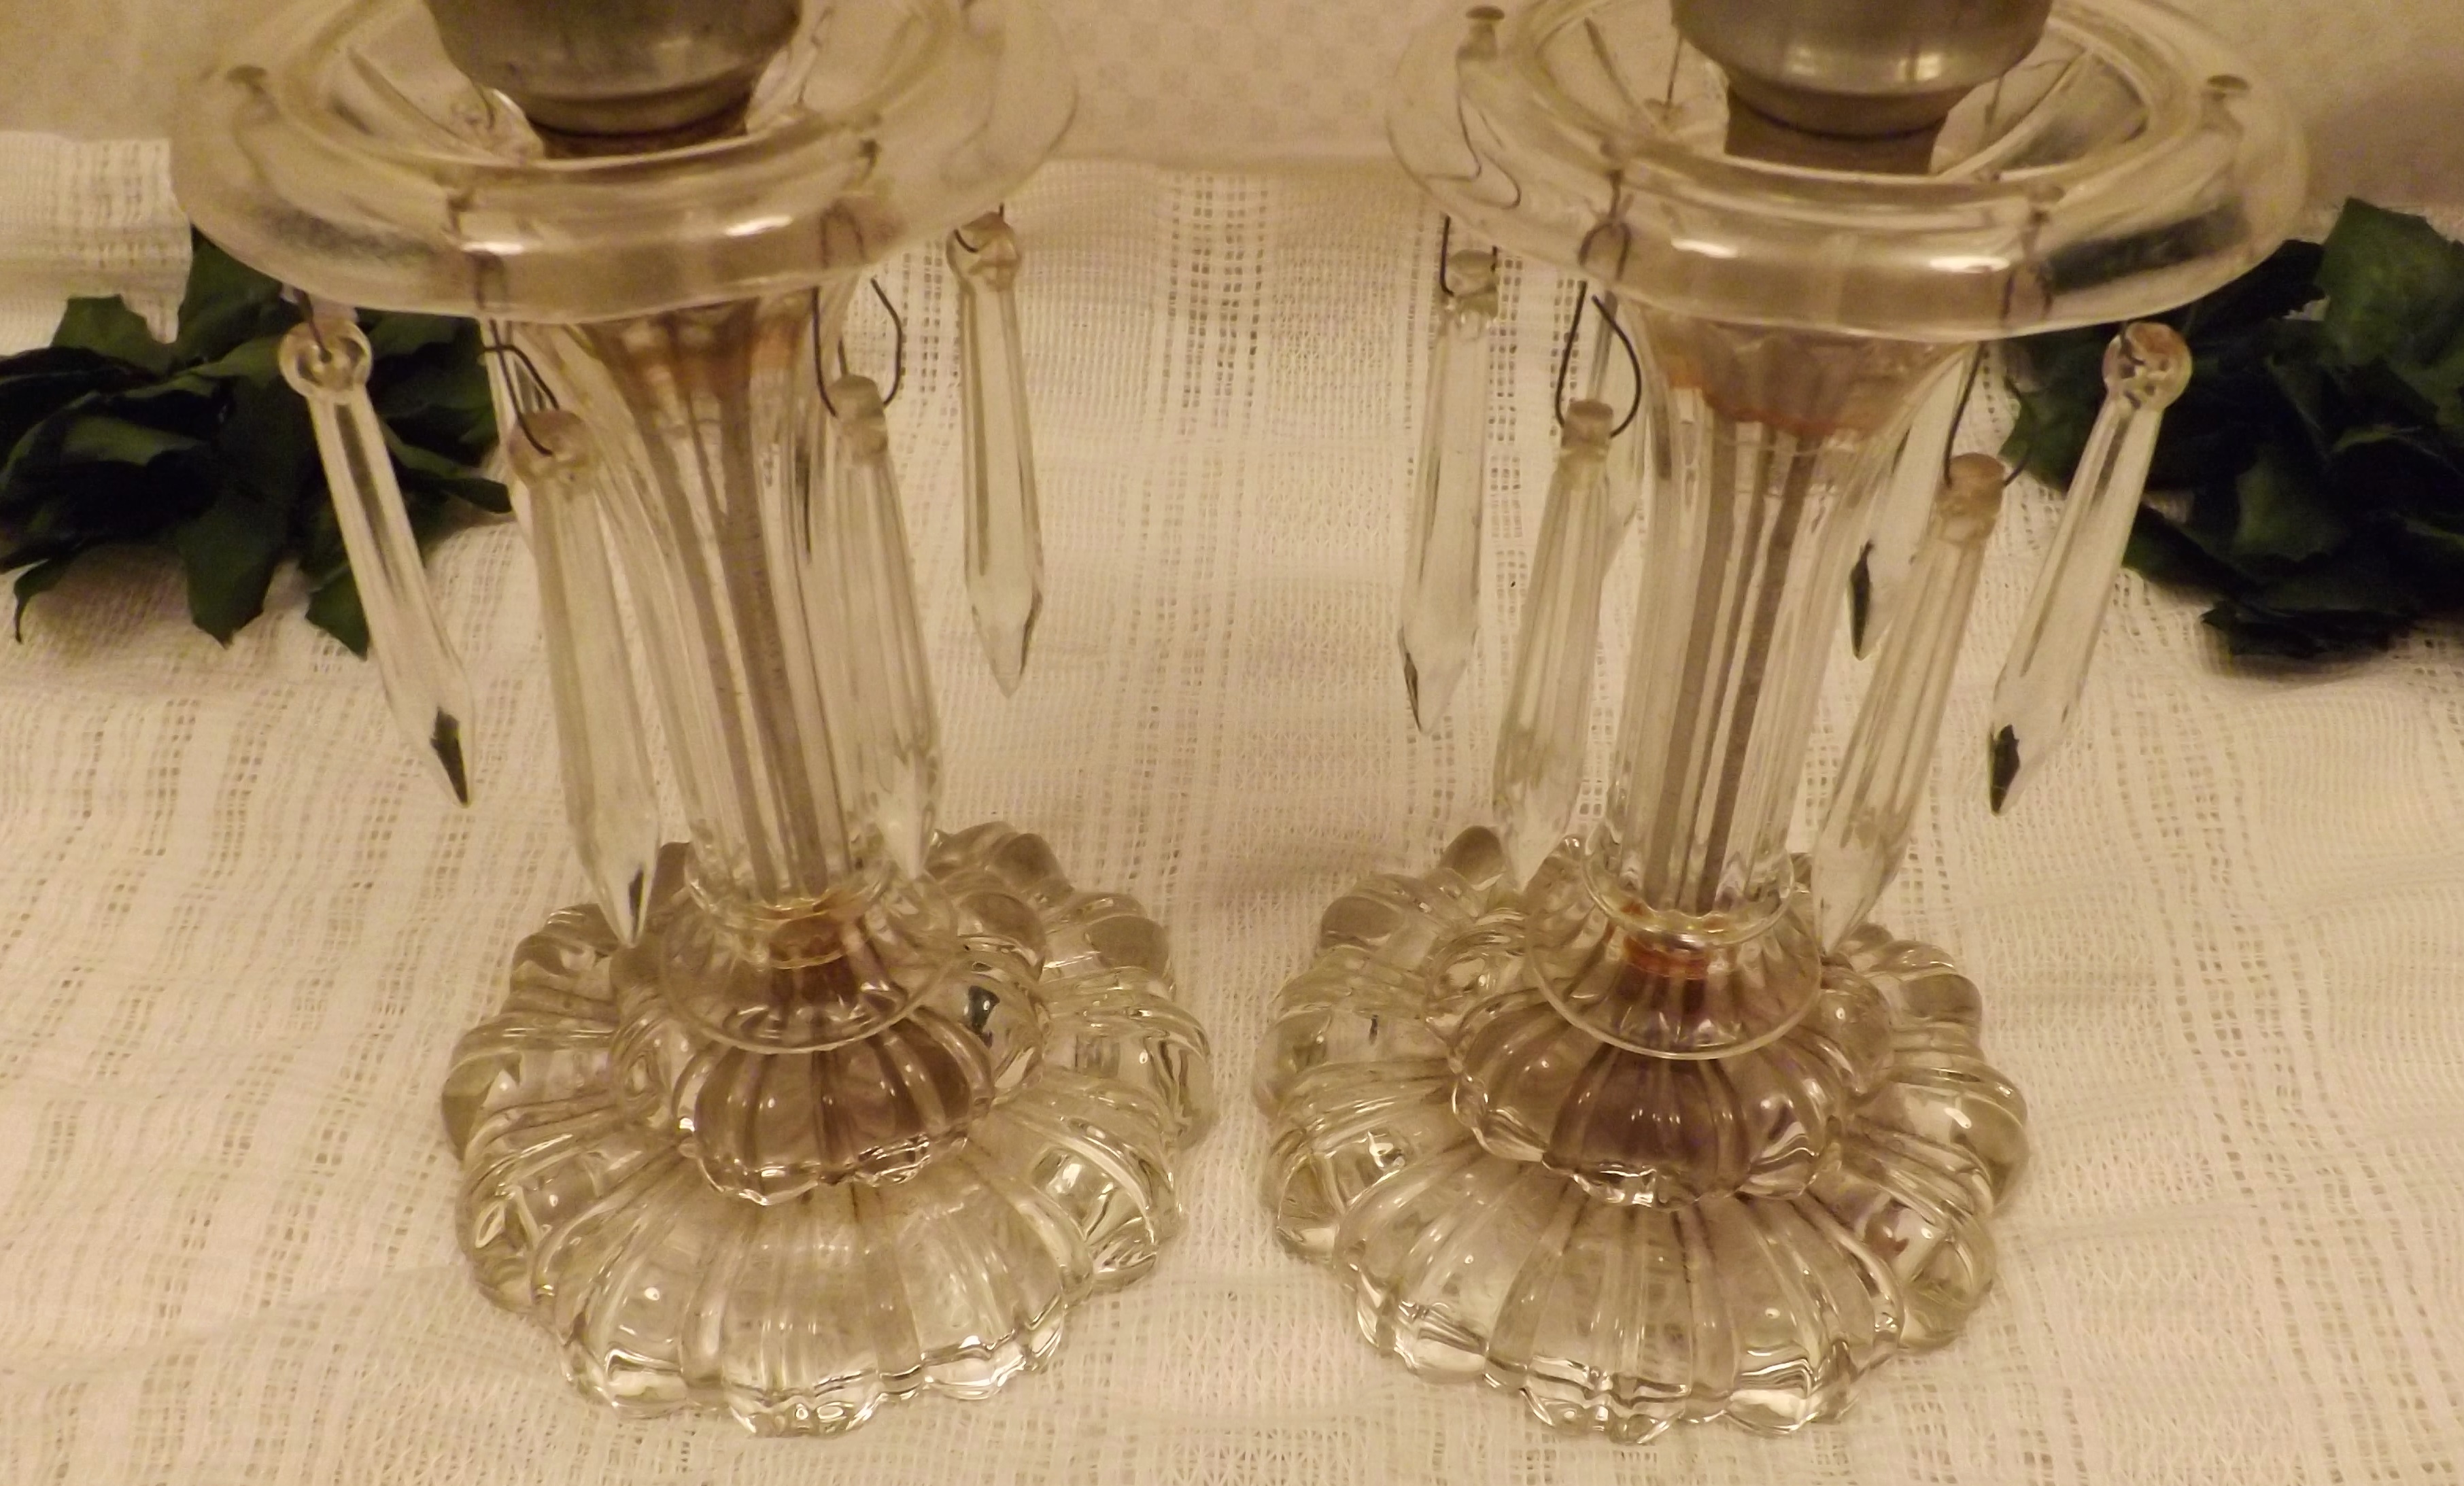 antique crystal table lamps with prisms